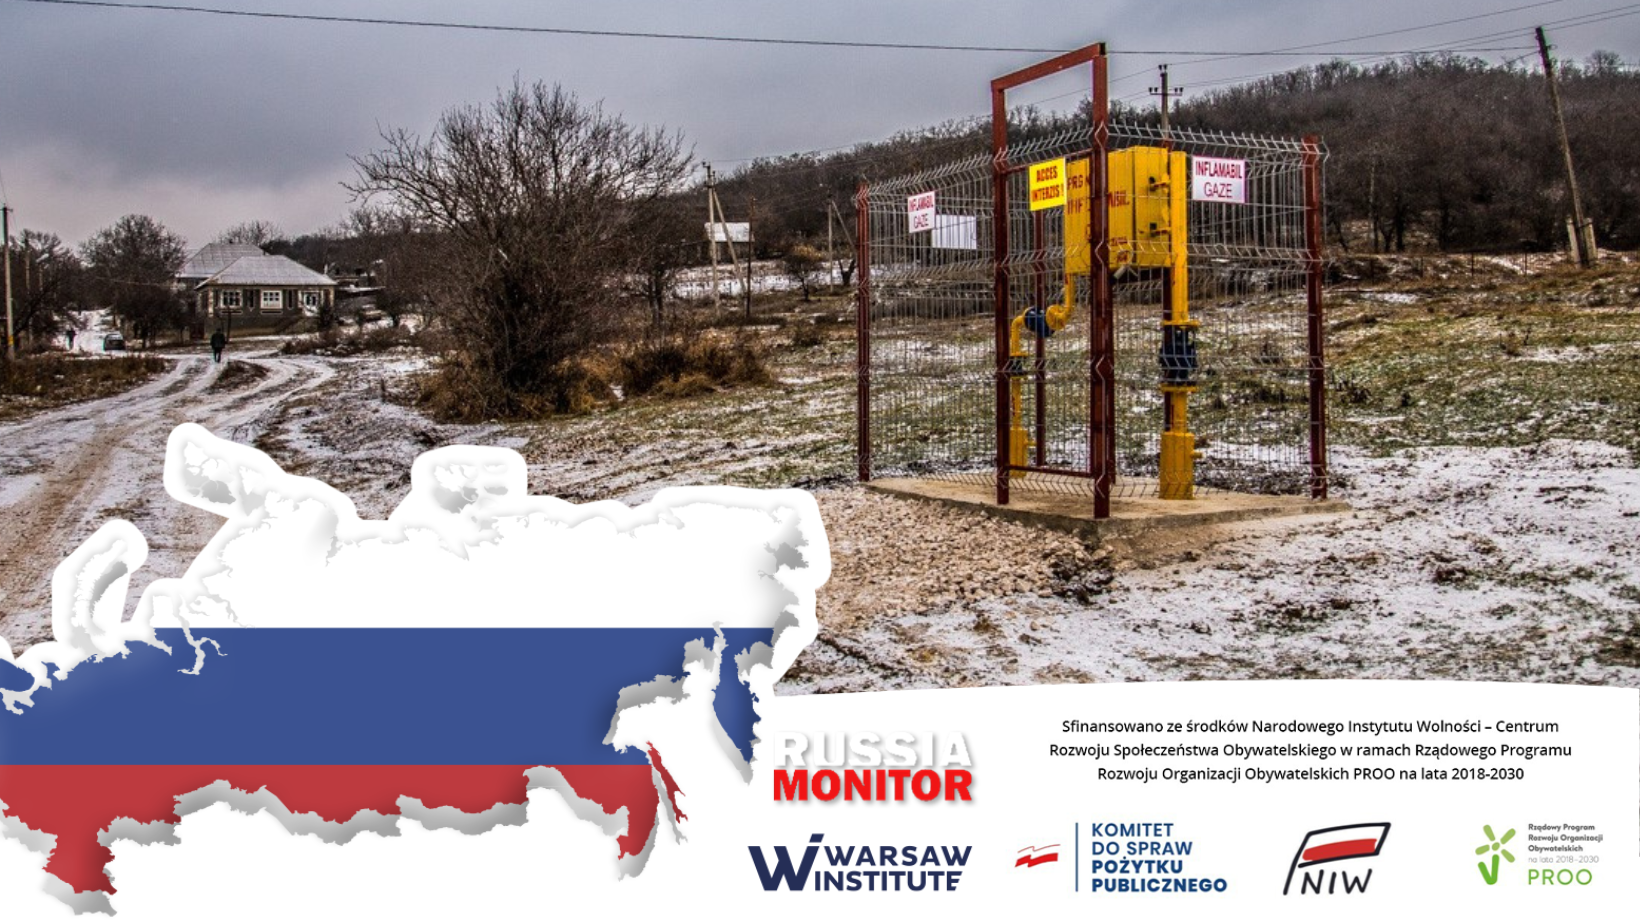 Moldova Is Becoming Independent of Russian Gas Flows